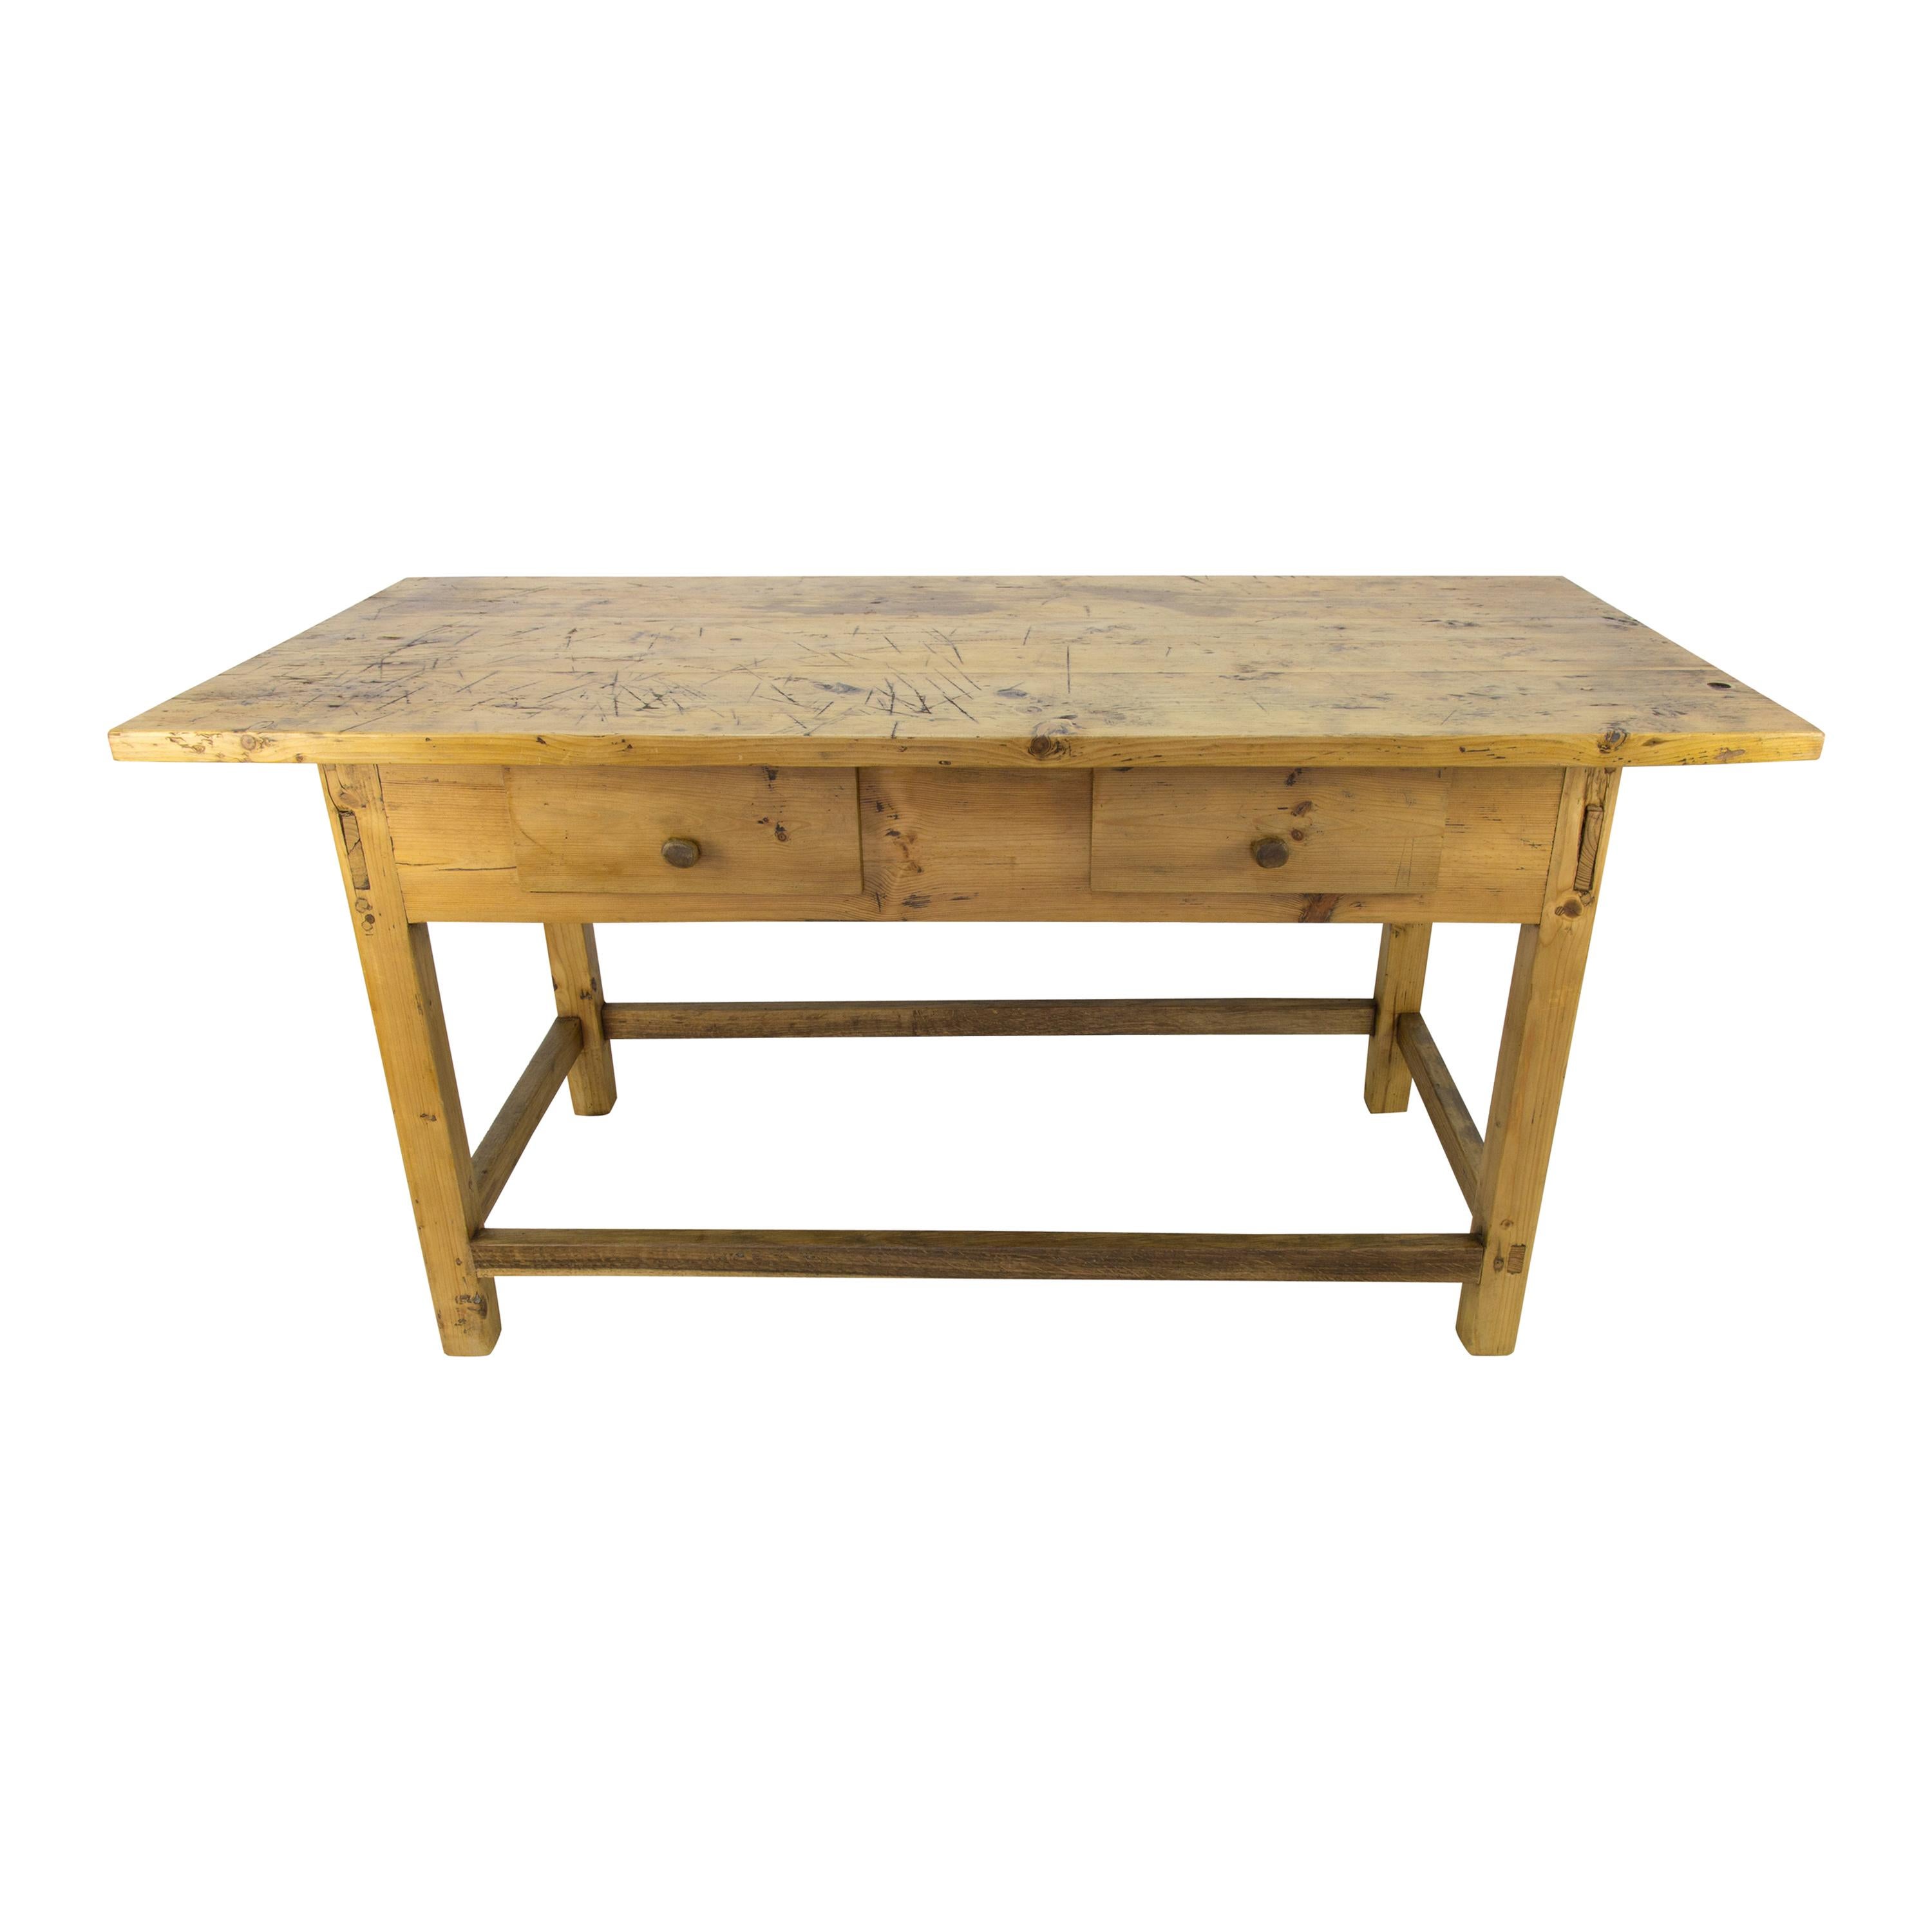 Rustic Country Style Baltic Pine Table, circa 1930s